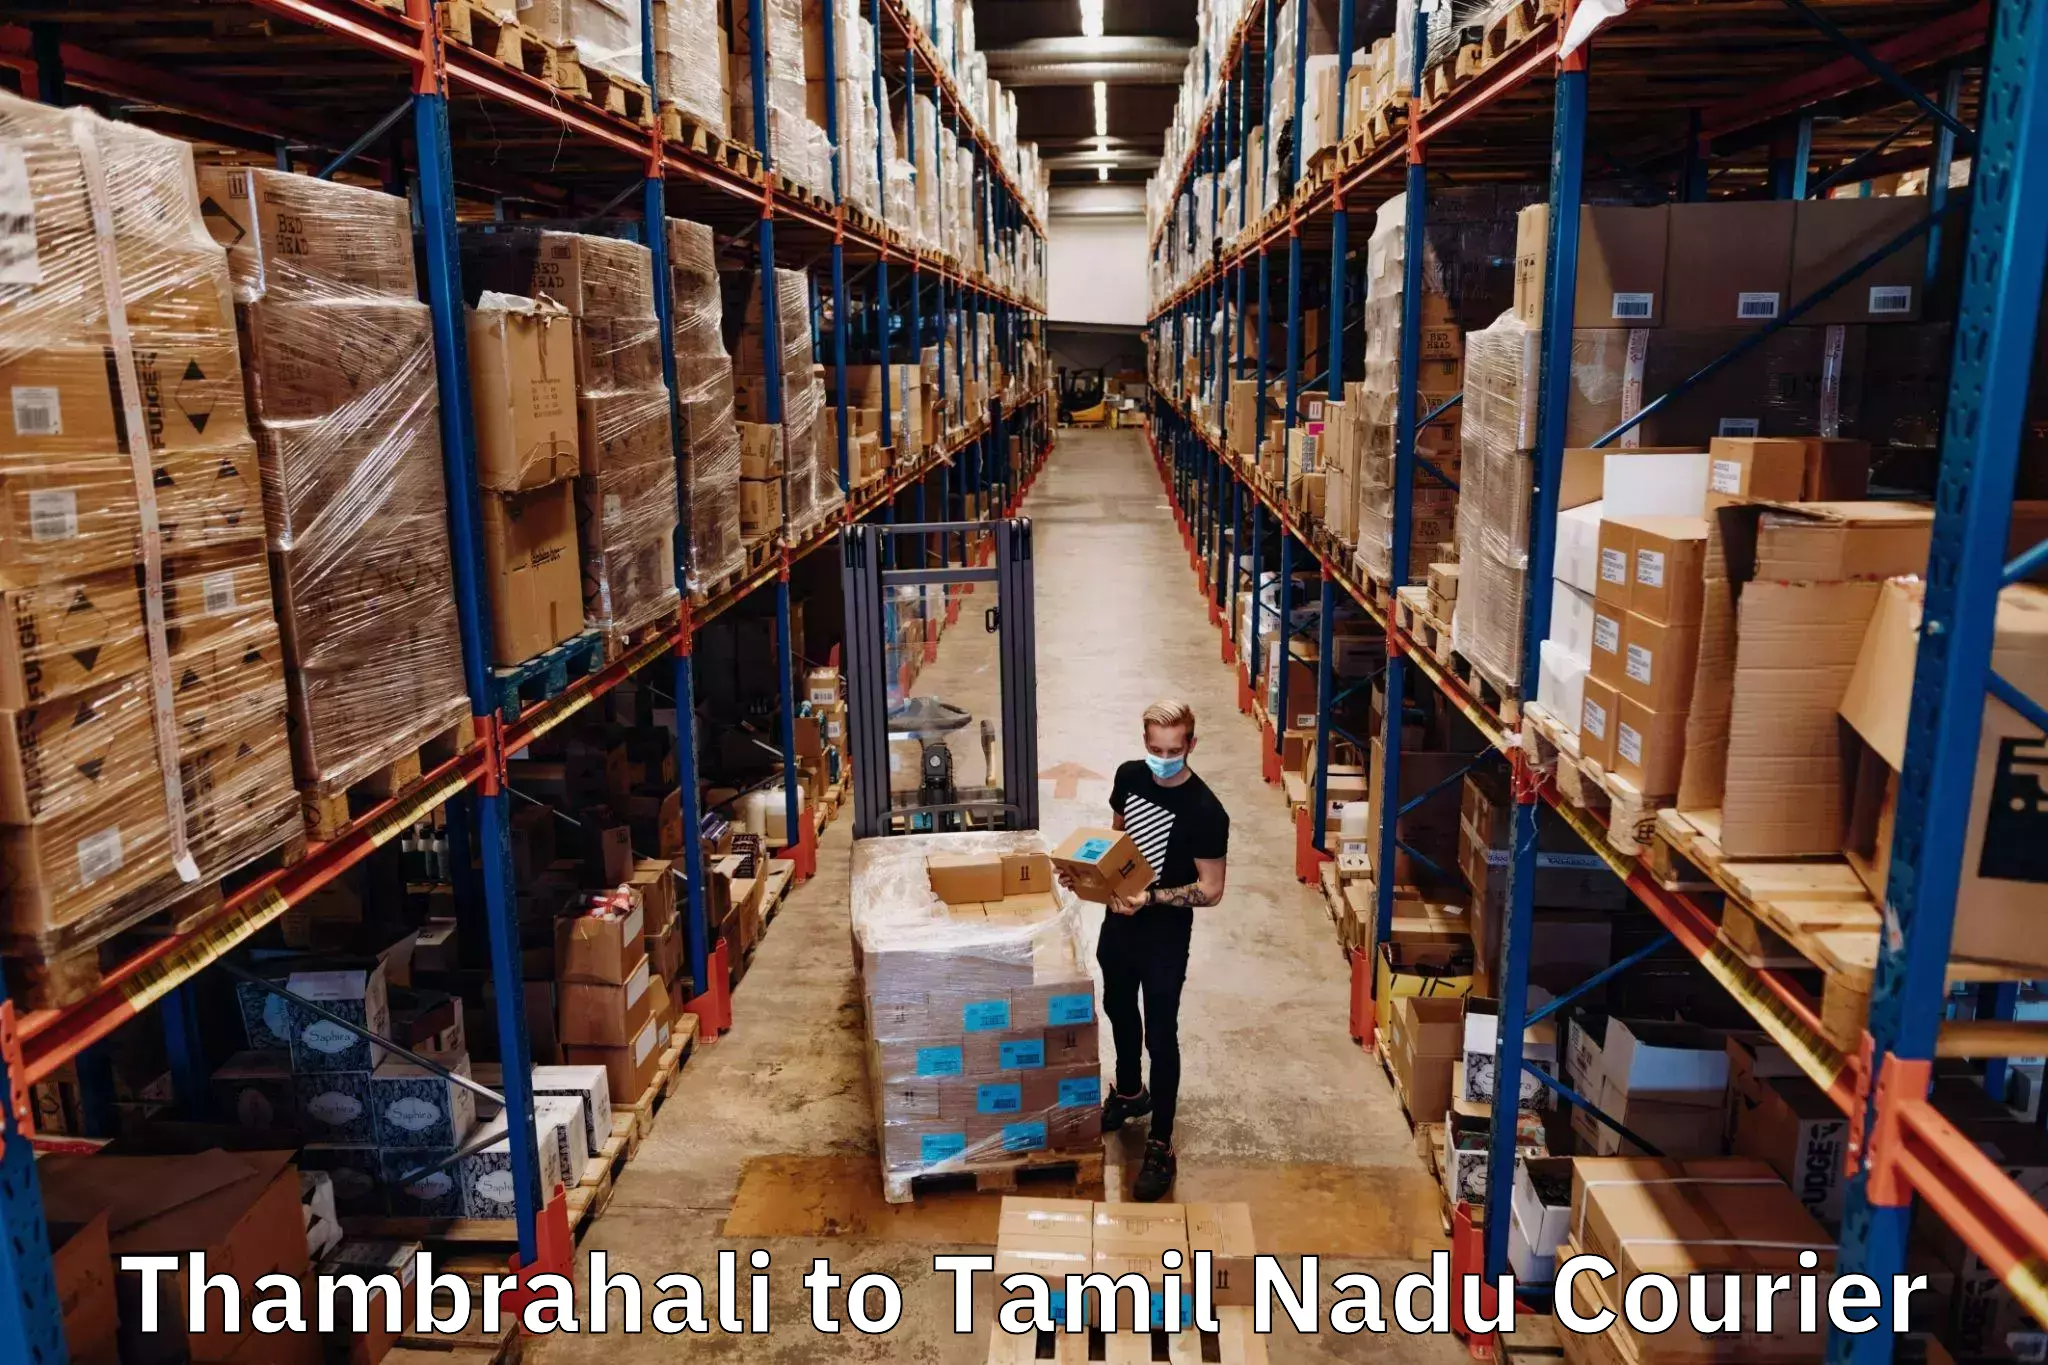 Medical delivery services Thambrahali to Tamil Nadu